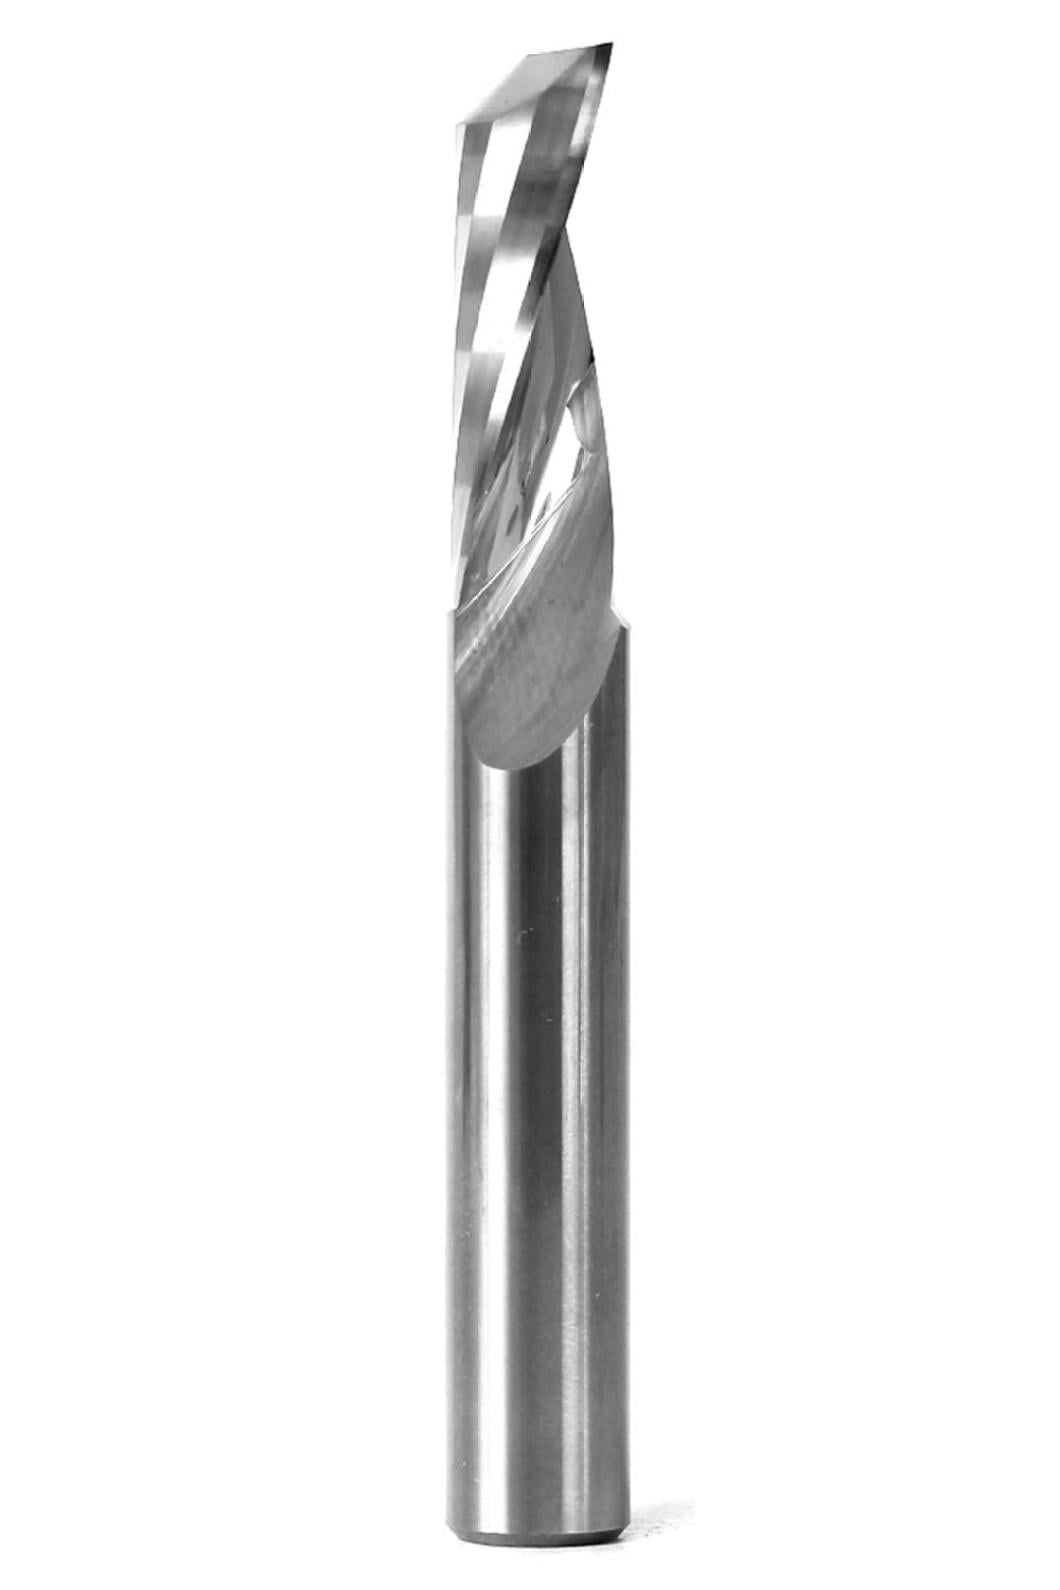 Yonico 31011-SC 1/8-Inch Dia O Flute Upcut Spiral End Mill CNC Router Bit 1/4-Inch Shank 